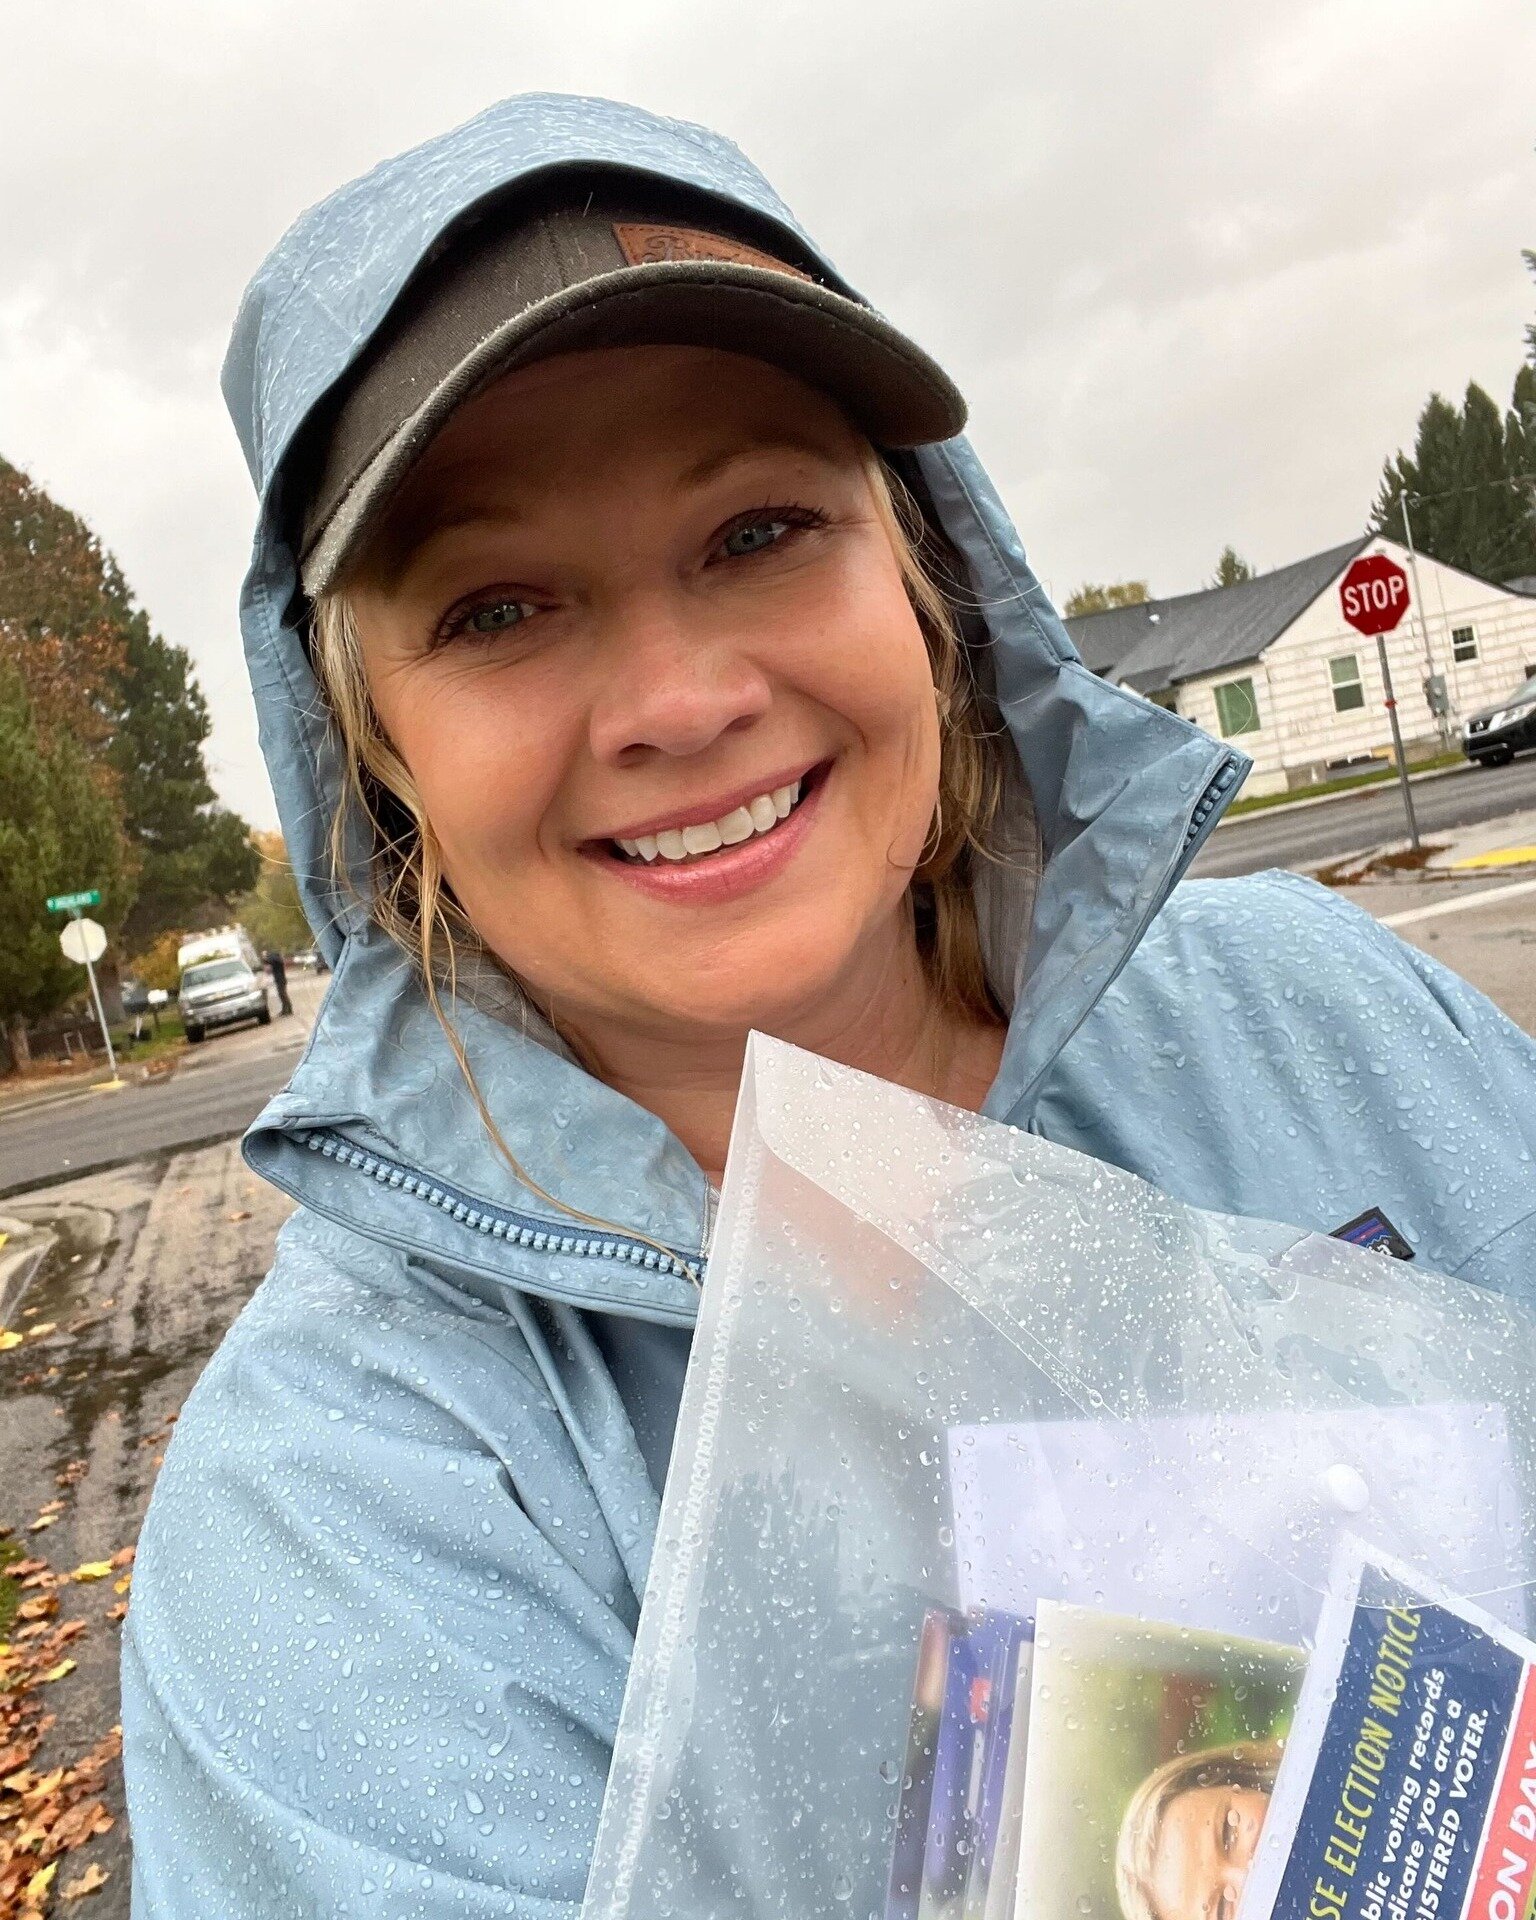 &ldquo;Life&rsquo;s not about waiting for the storm to pass&hellip;It&rsquo;s about learning to dance in the rain.&rdquo; &ndash; Vivian Greene

I'm out here rain or shine, knocking our neighbors to make sure they Get Out to Vote! One more day to go.